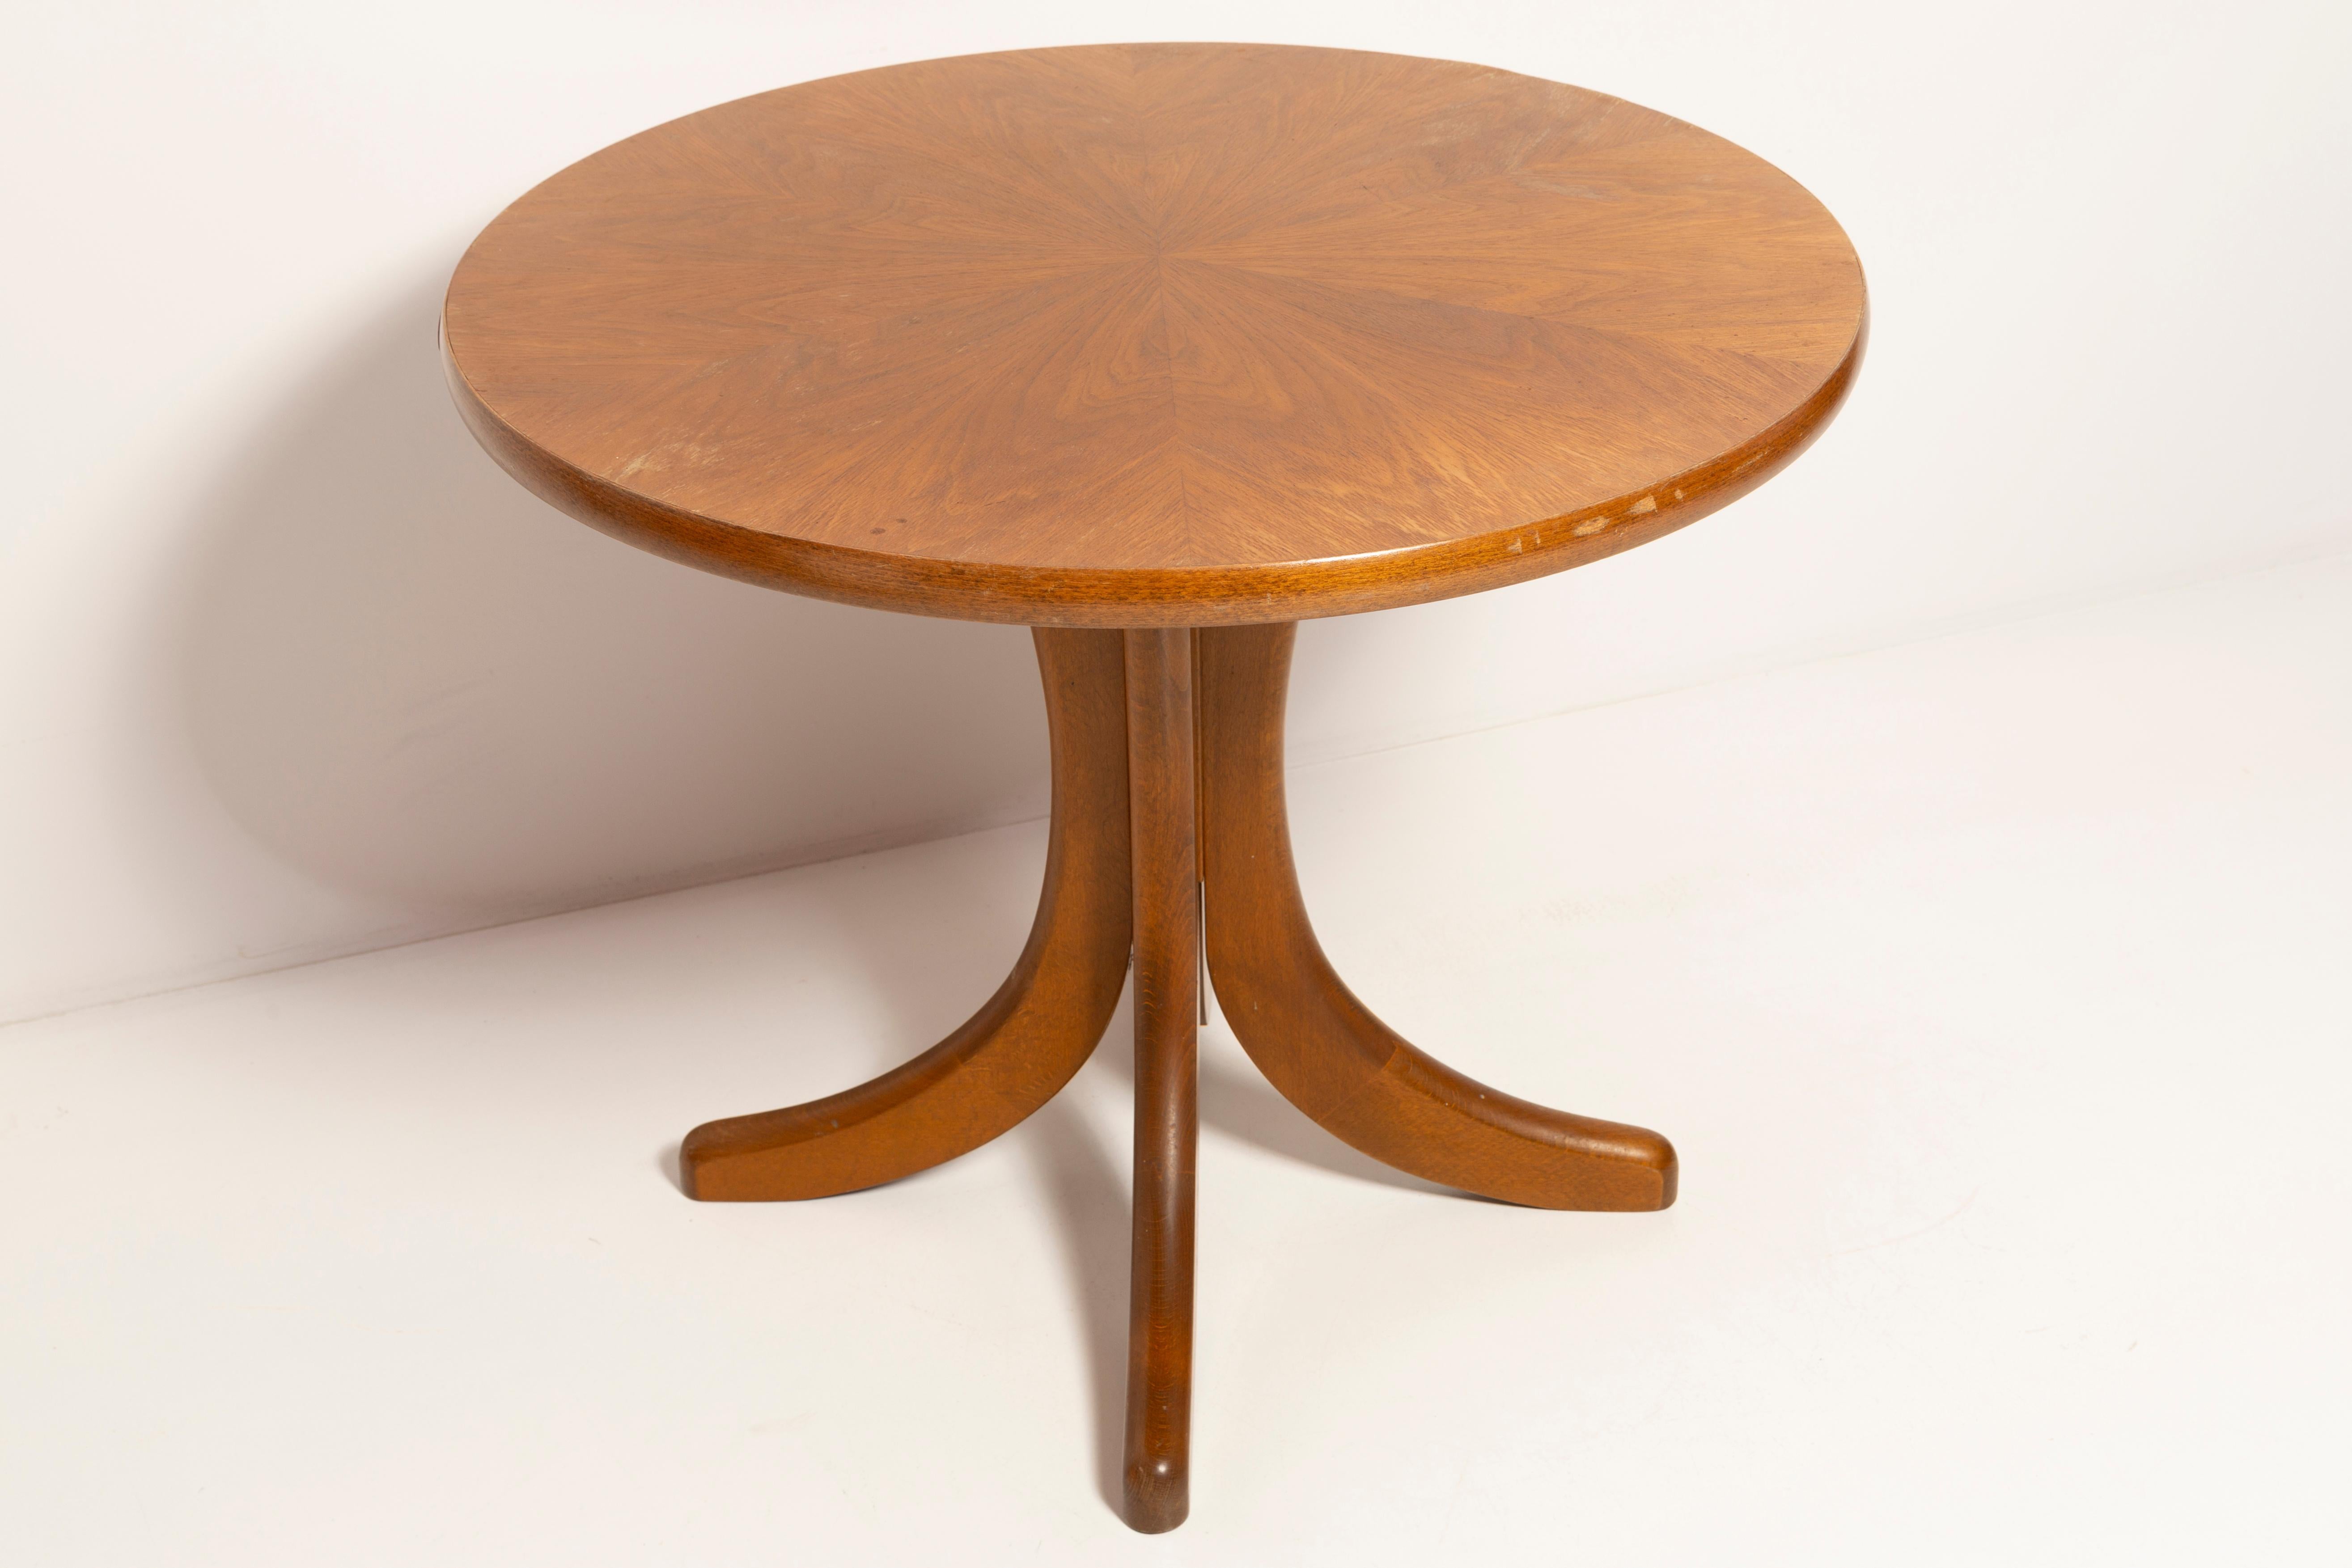 Hand-Painted Mid-Century Modern Round Coffee Table, Oak Wood, Poland, 1960s For Sale